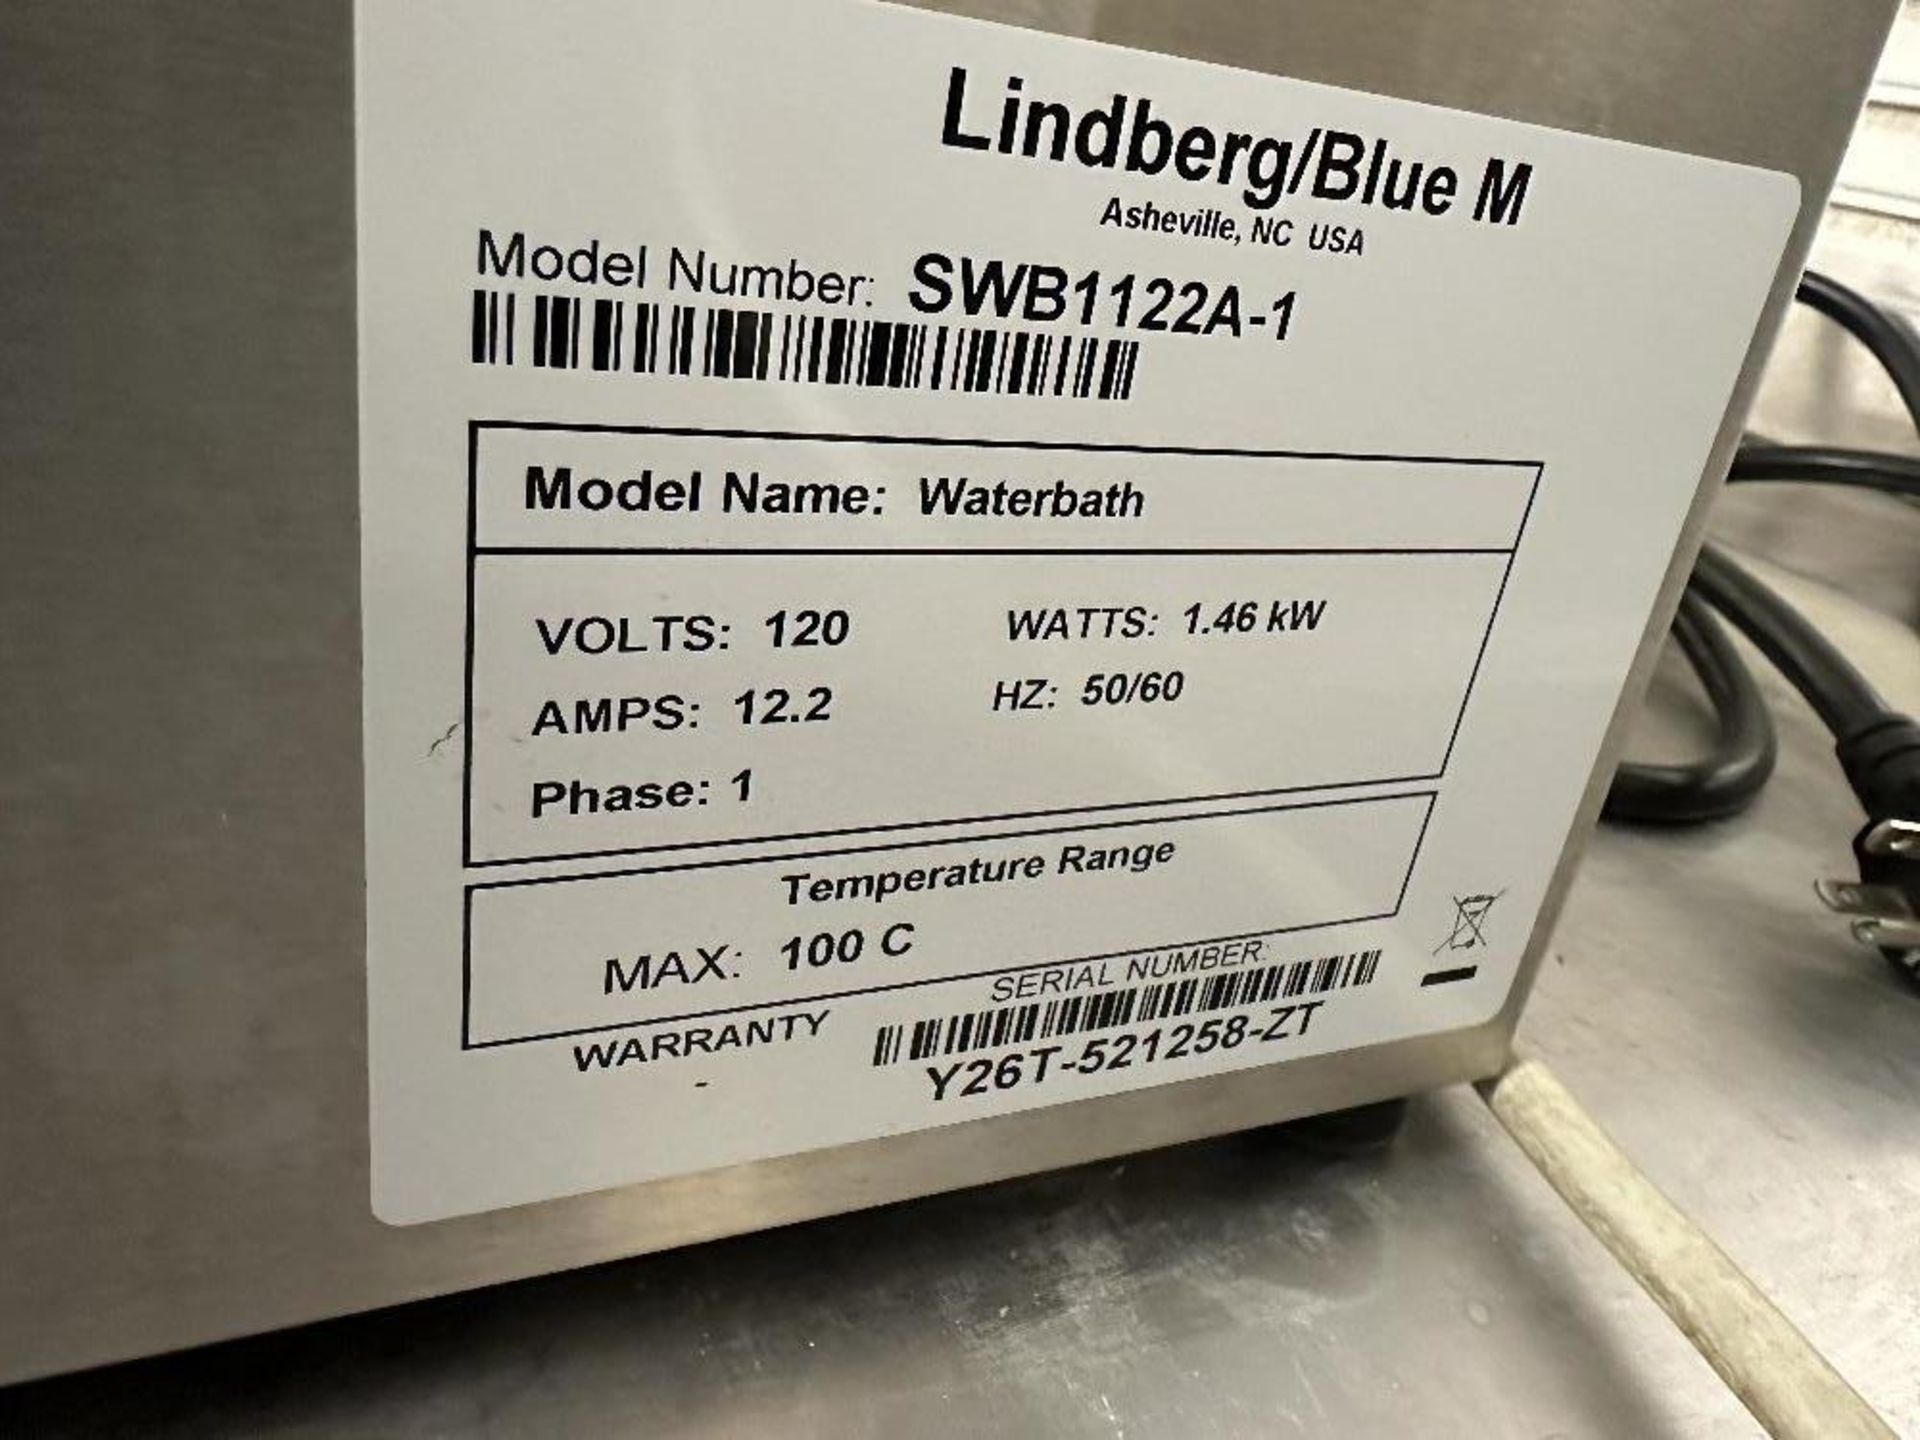 Lindberg swb1122a-1 Shaking Circulating Water Bath (LOCATED IN MIDDLETOWN, N.Y.)-FOR PACKAGING & - Image 3 of 3